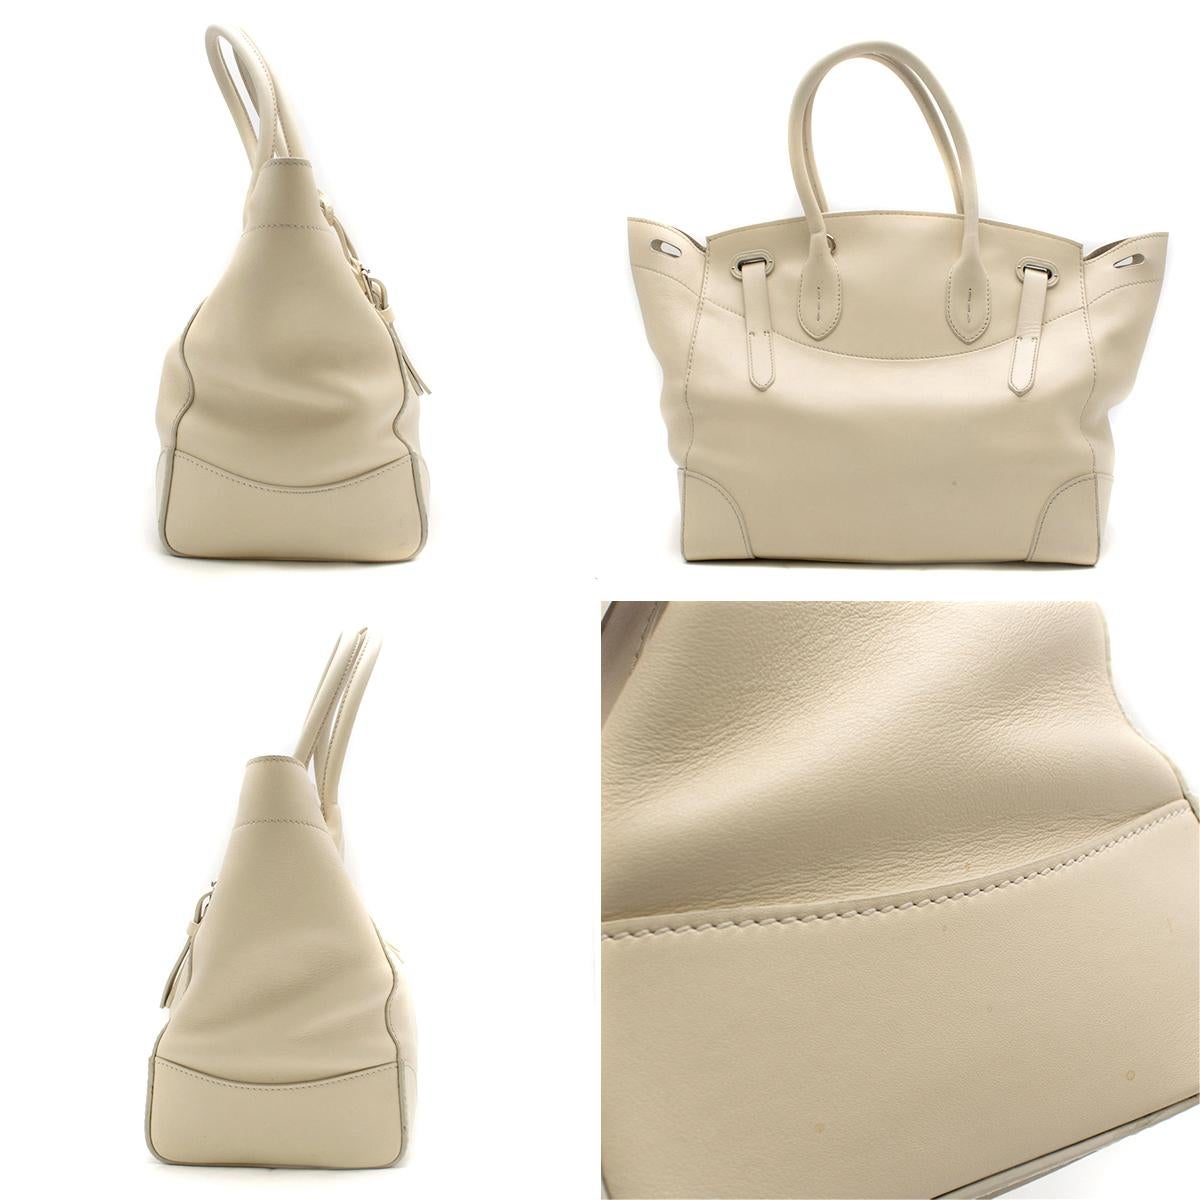 Ralph Lauren Ivory Soft Ricky BagRalph Lauren Cream Soft Ricky Bag

- Two leather top handles, each with a 5½